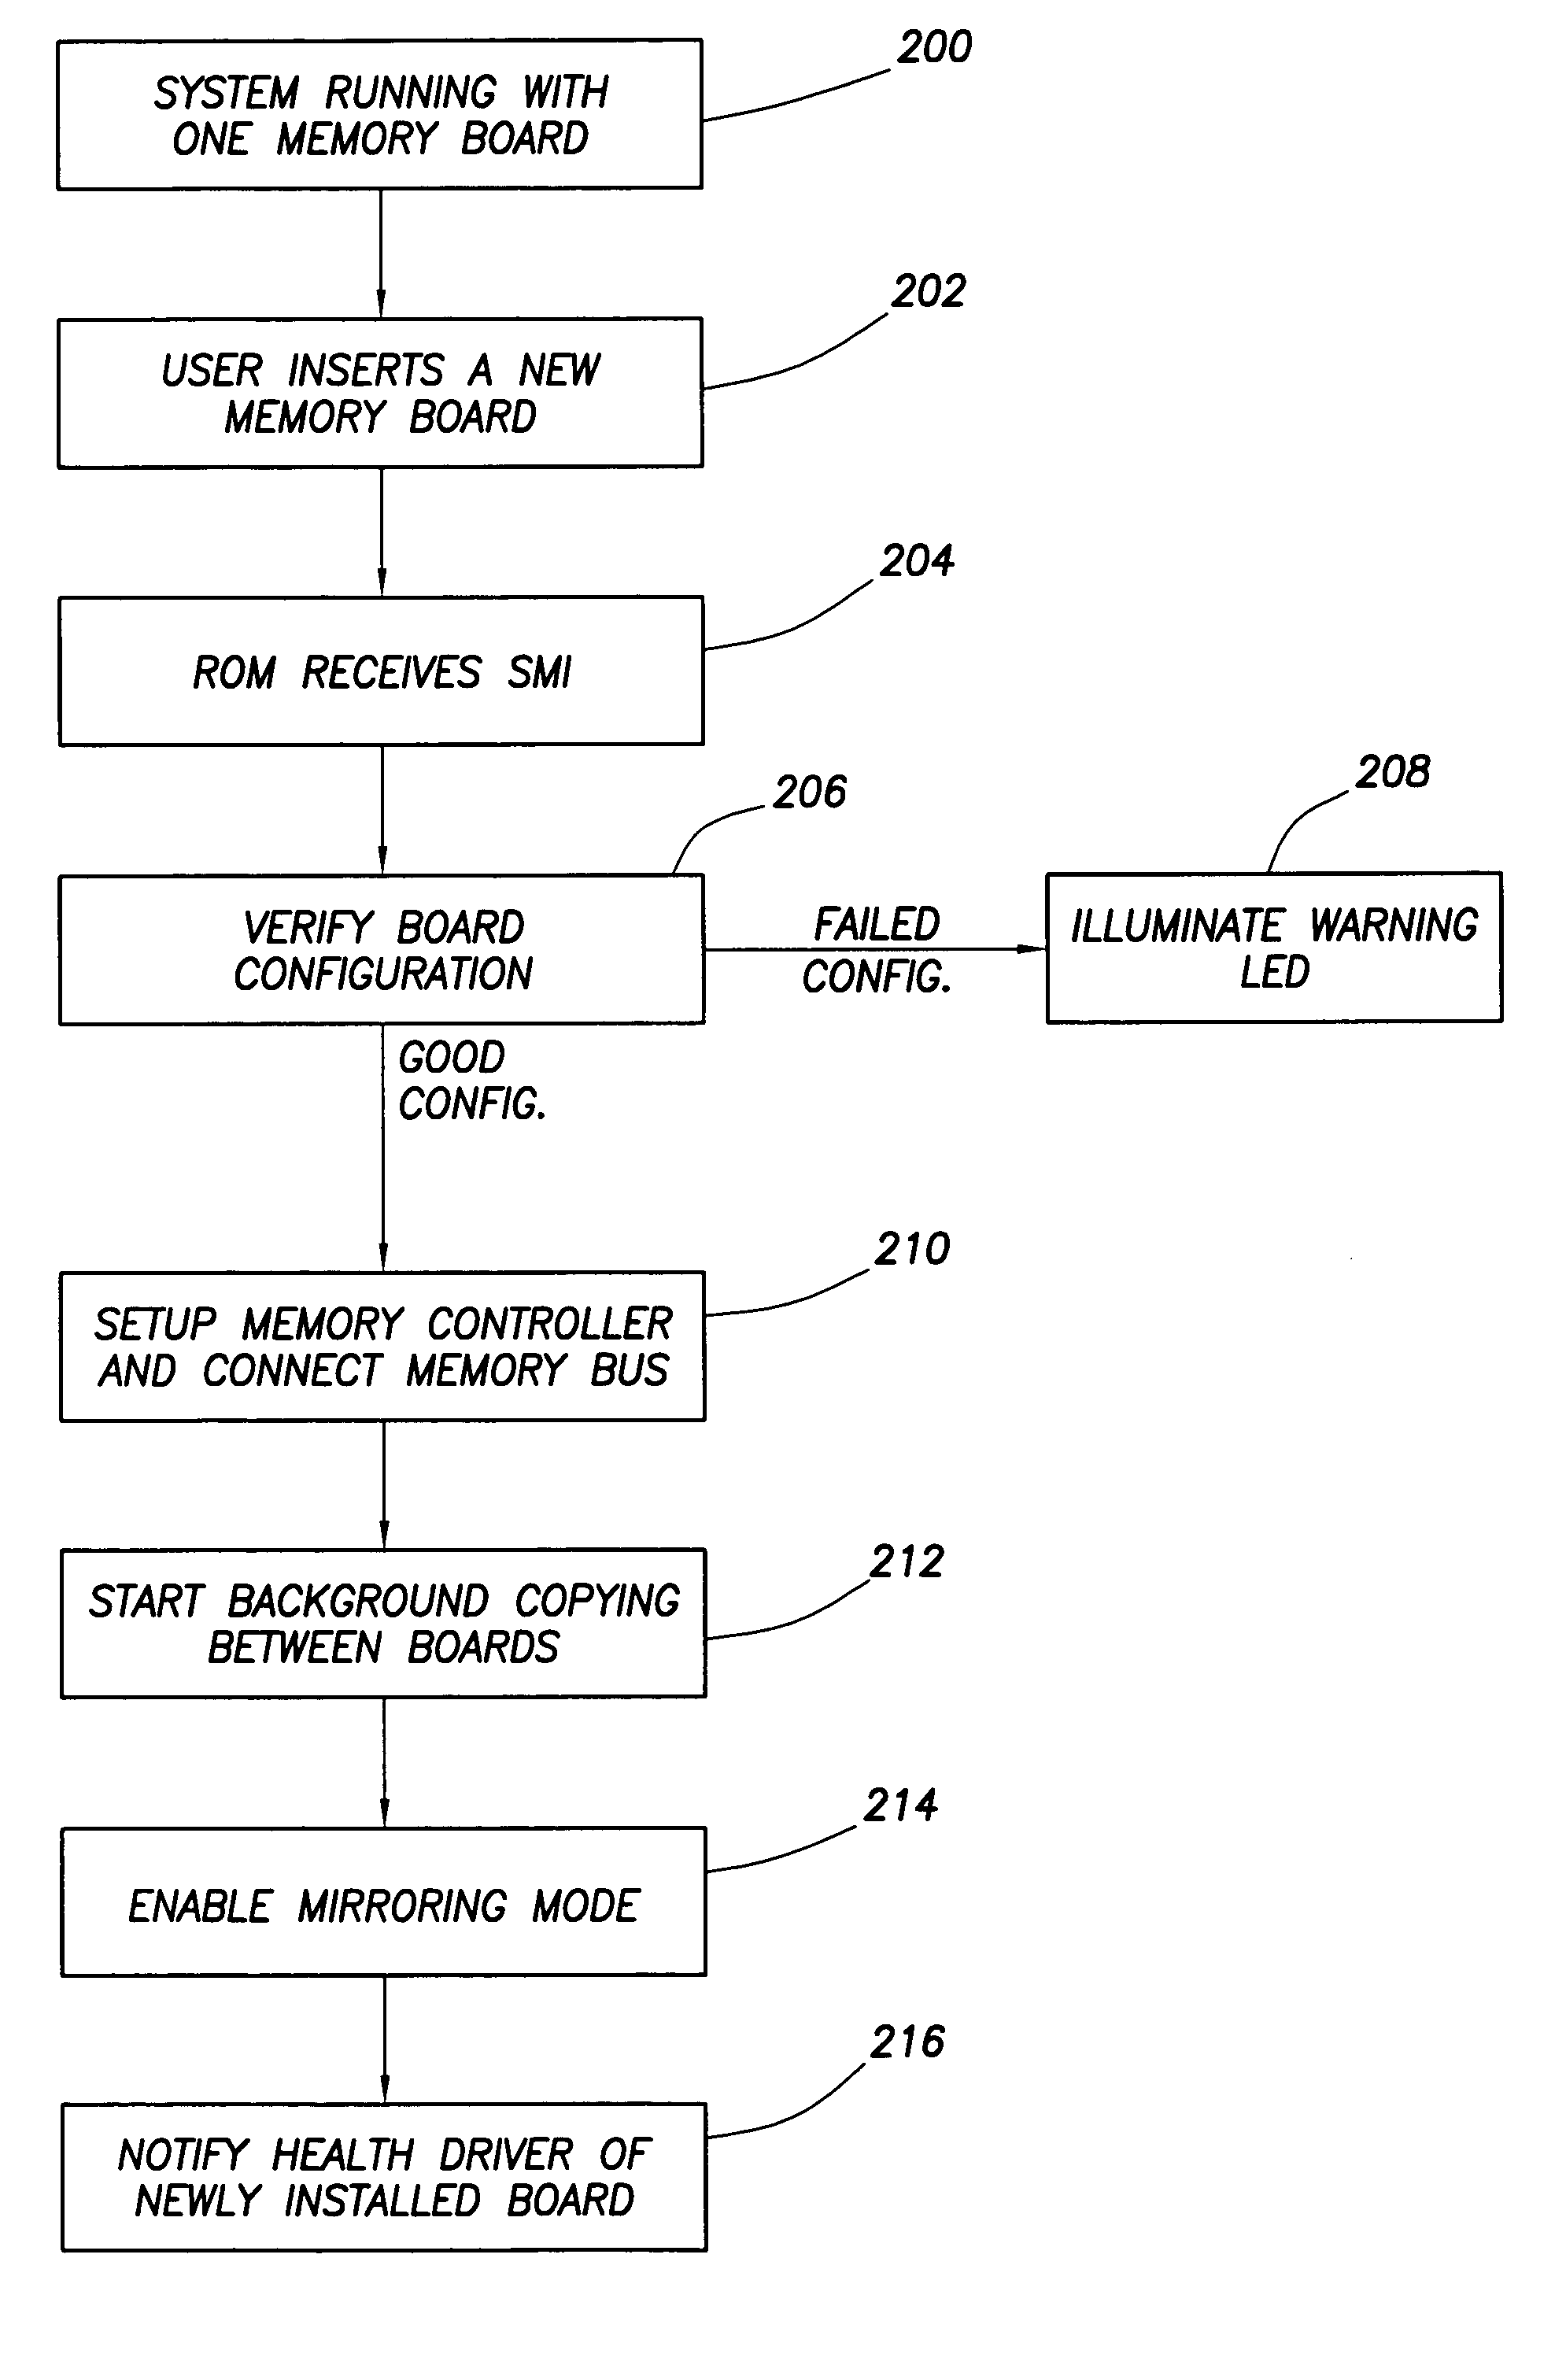 Hot mirroring in a computer system with redundant memory subsystems